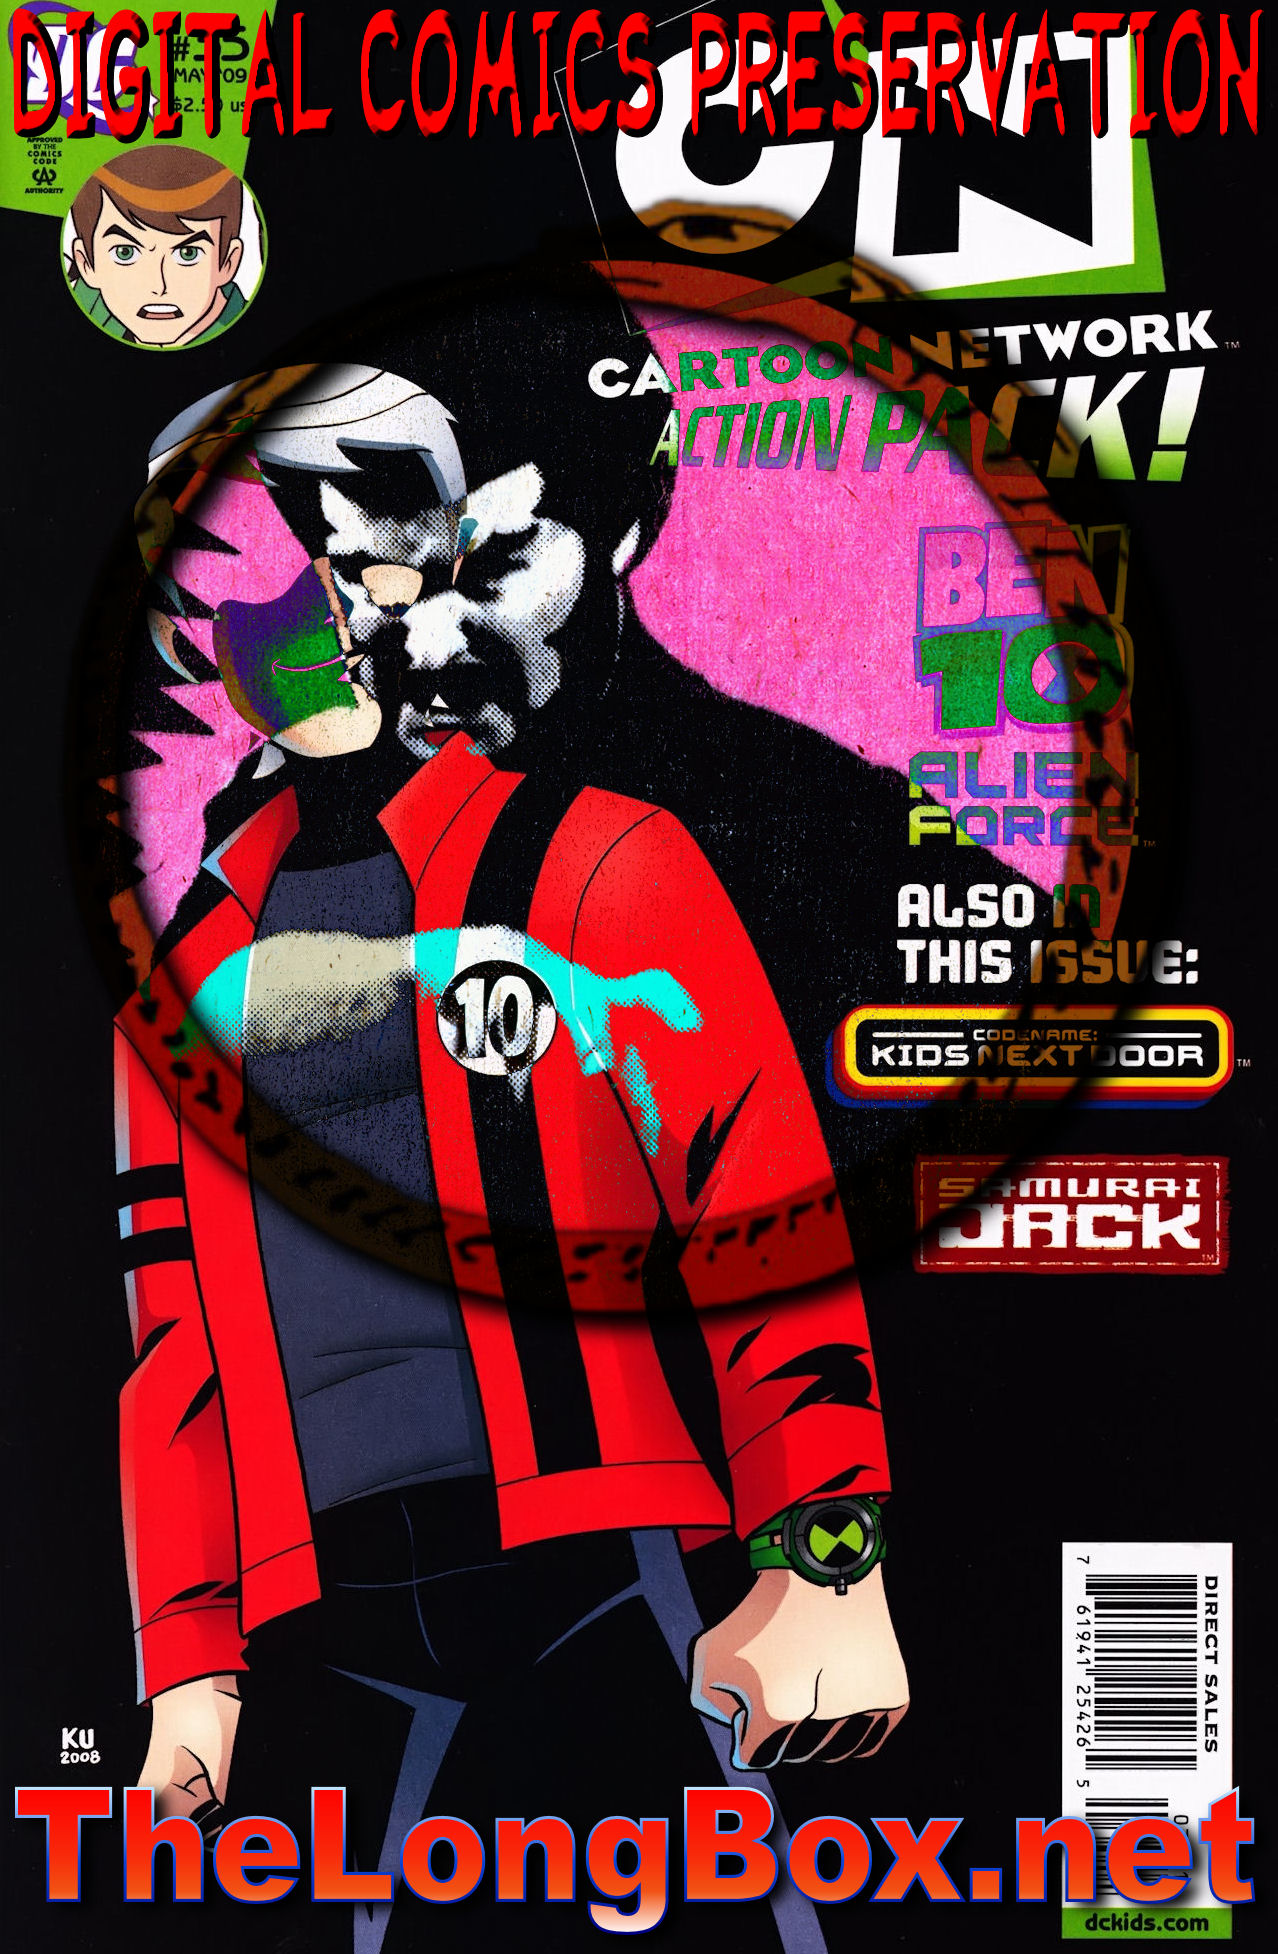 Read online Cartoon Network Action Pack comic -  Issue #35 - 37